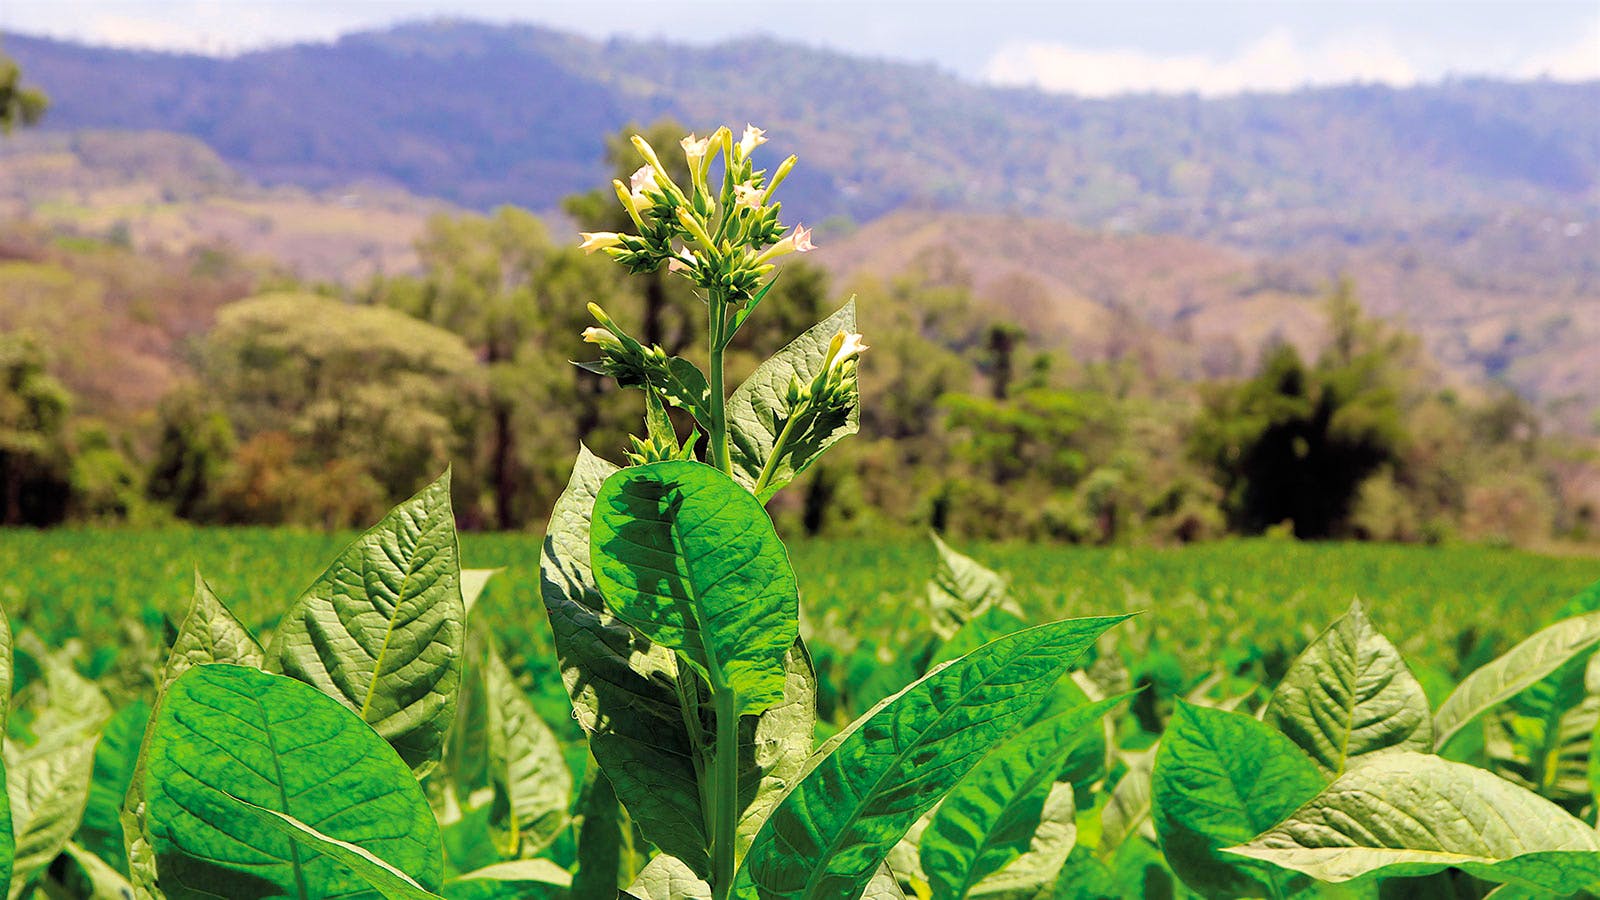 Yargüera tobacco for Altadis thrives in Honduras. The heirloom seed was brought to Honduras in the 1960s and recently resurrected for Altadis.